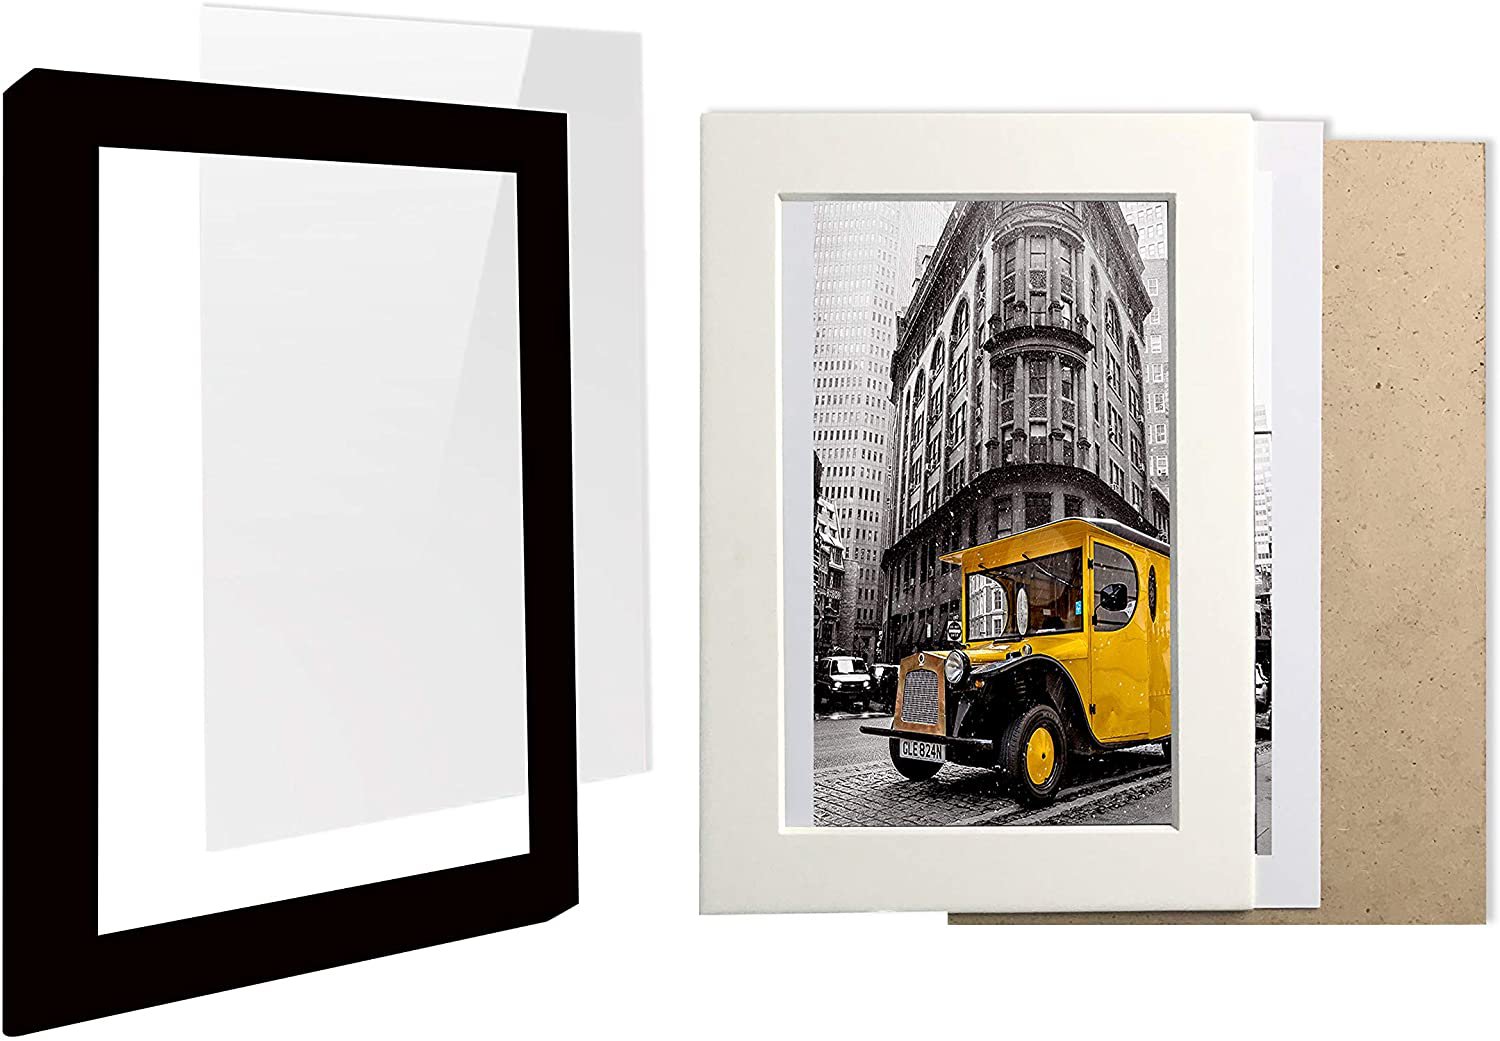 Art Emotion Solid Wood Picture Frame with 2MM Reinforced Glass, Frame for Photo, Hangers for Horizontal or Vertical Display (Black, 8x10 with 5x7 Opening)